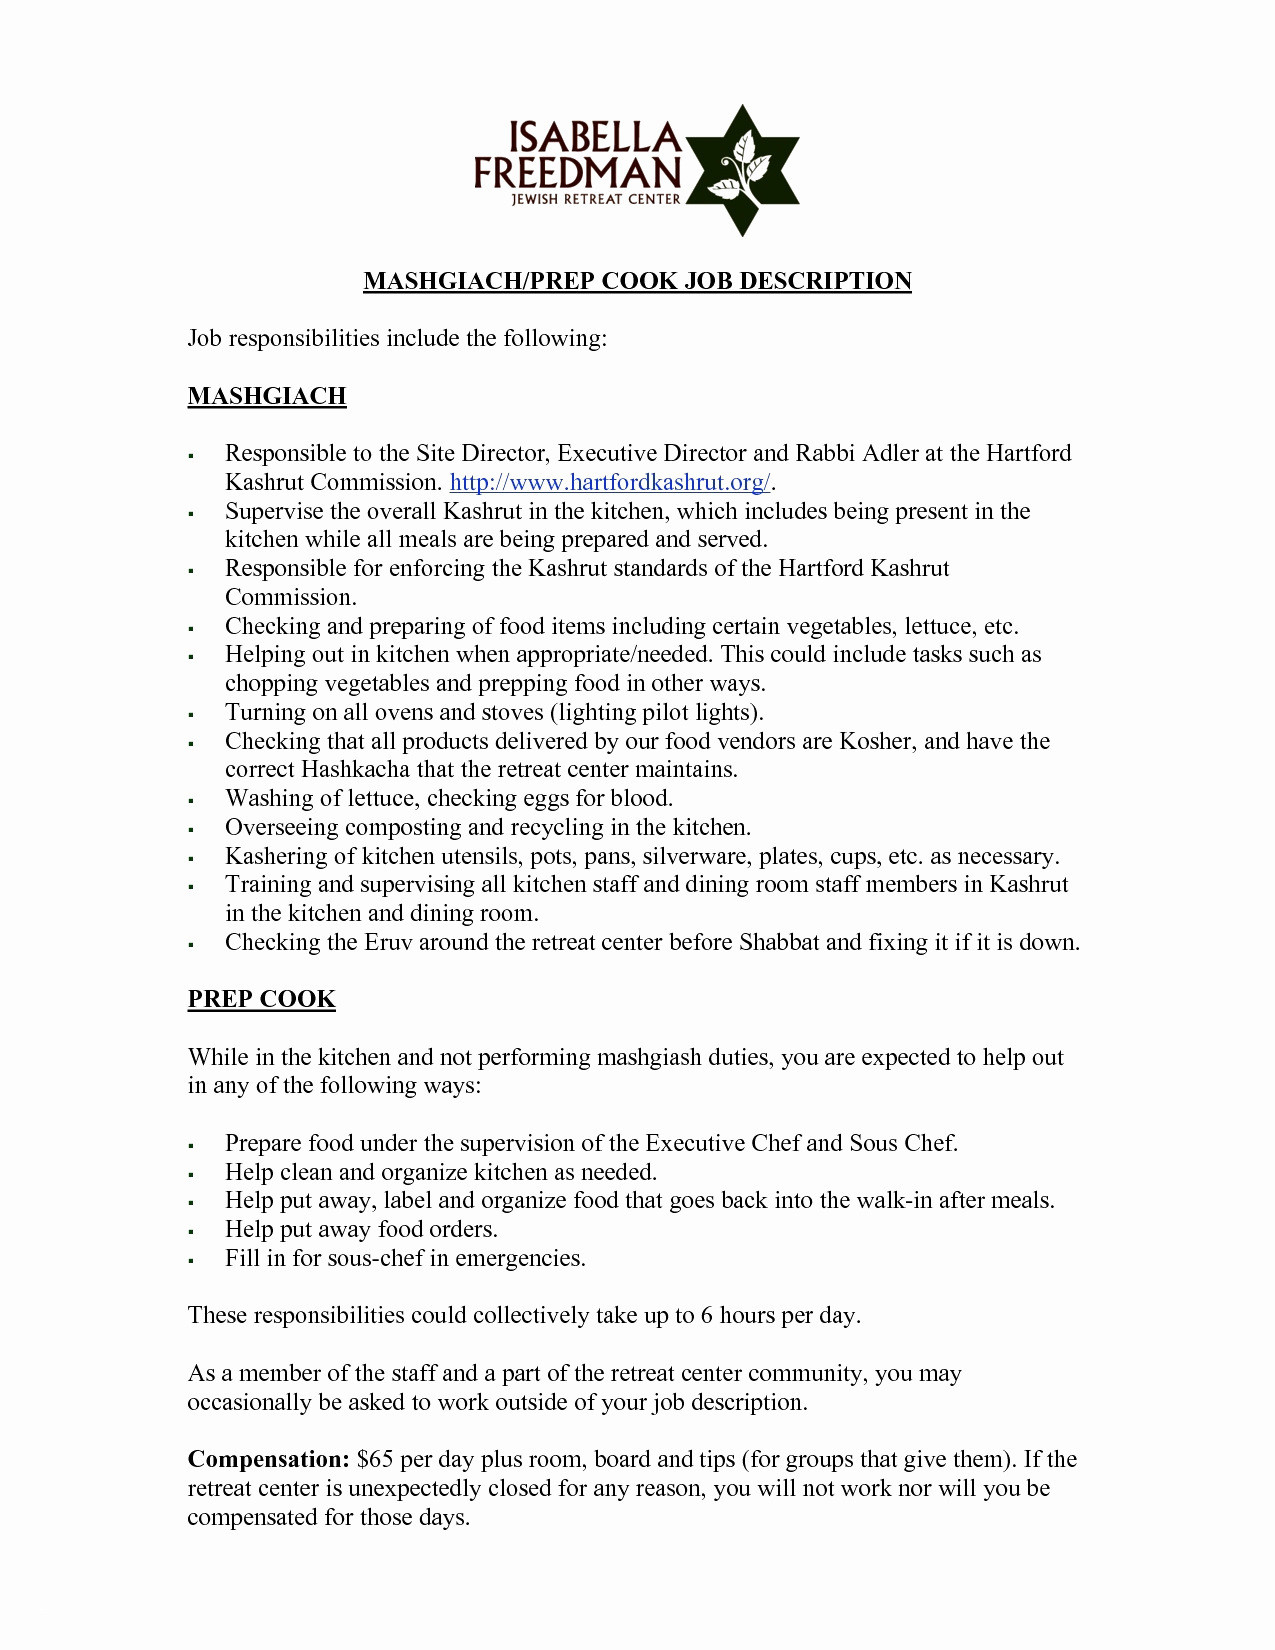 Stand Out Cover Letter Template - How to Make A Cover Letter Stand Out Beautiful Resume Doc Template